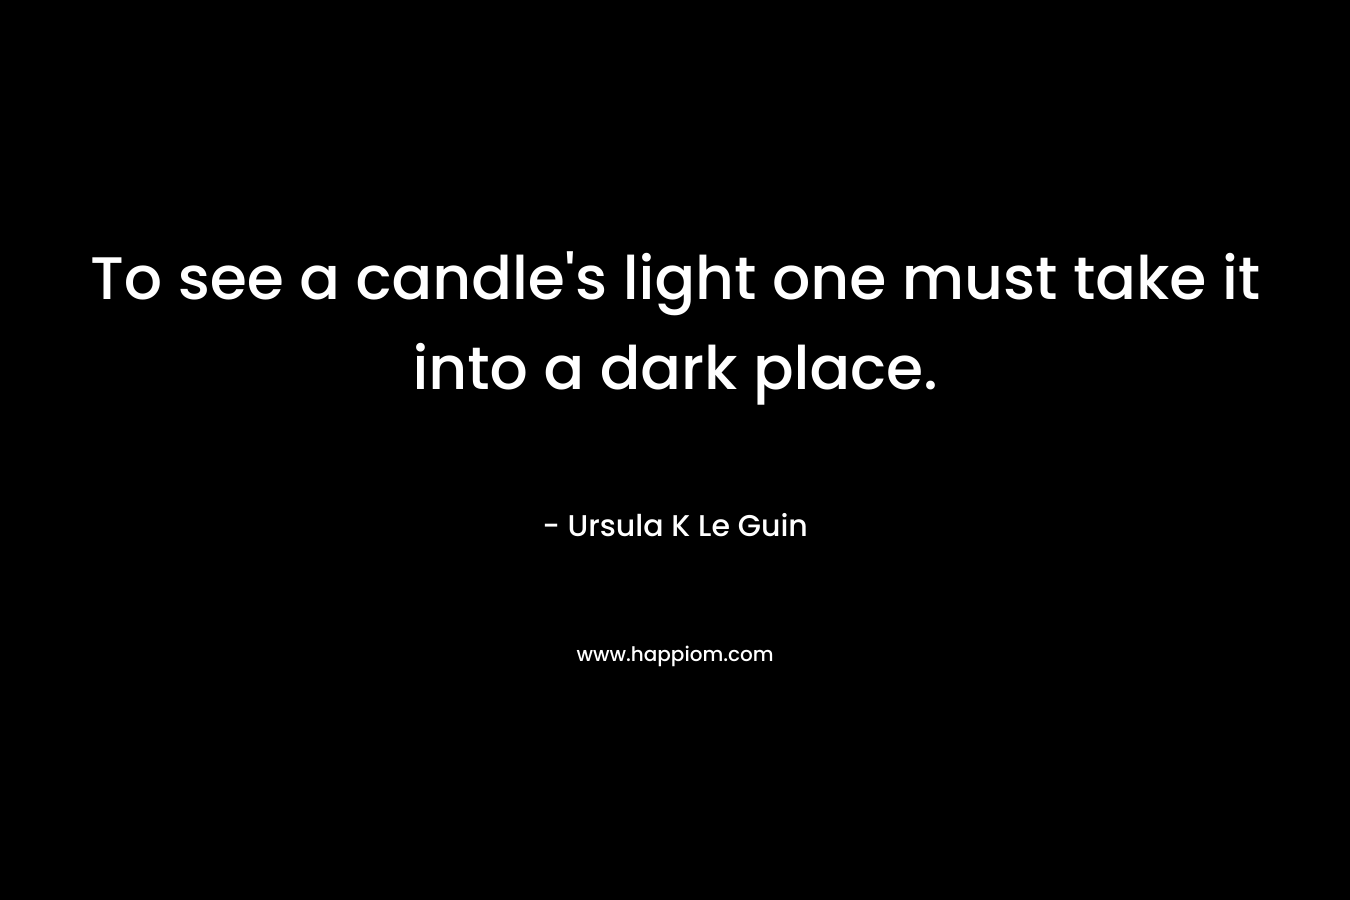 To see a candle’s light one must take it into a dark place. – Ursula K Le Guin